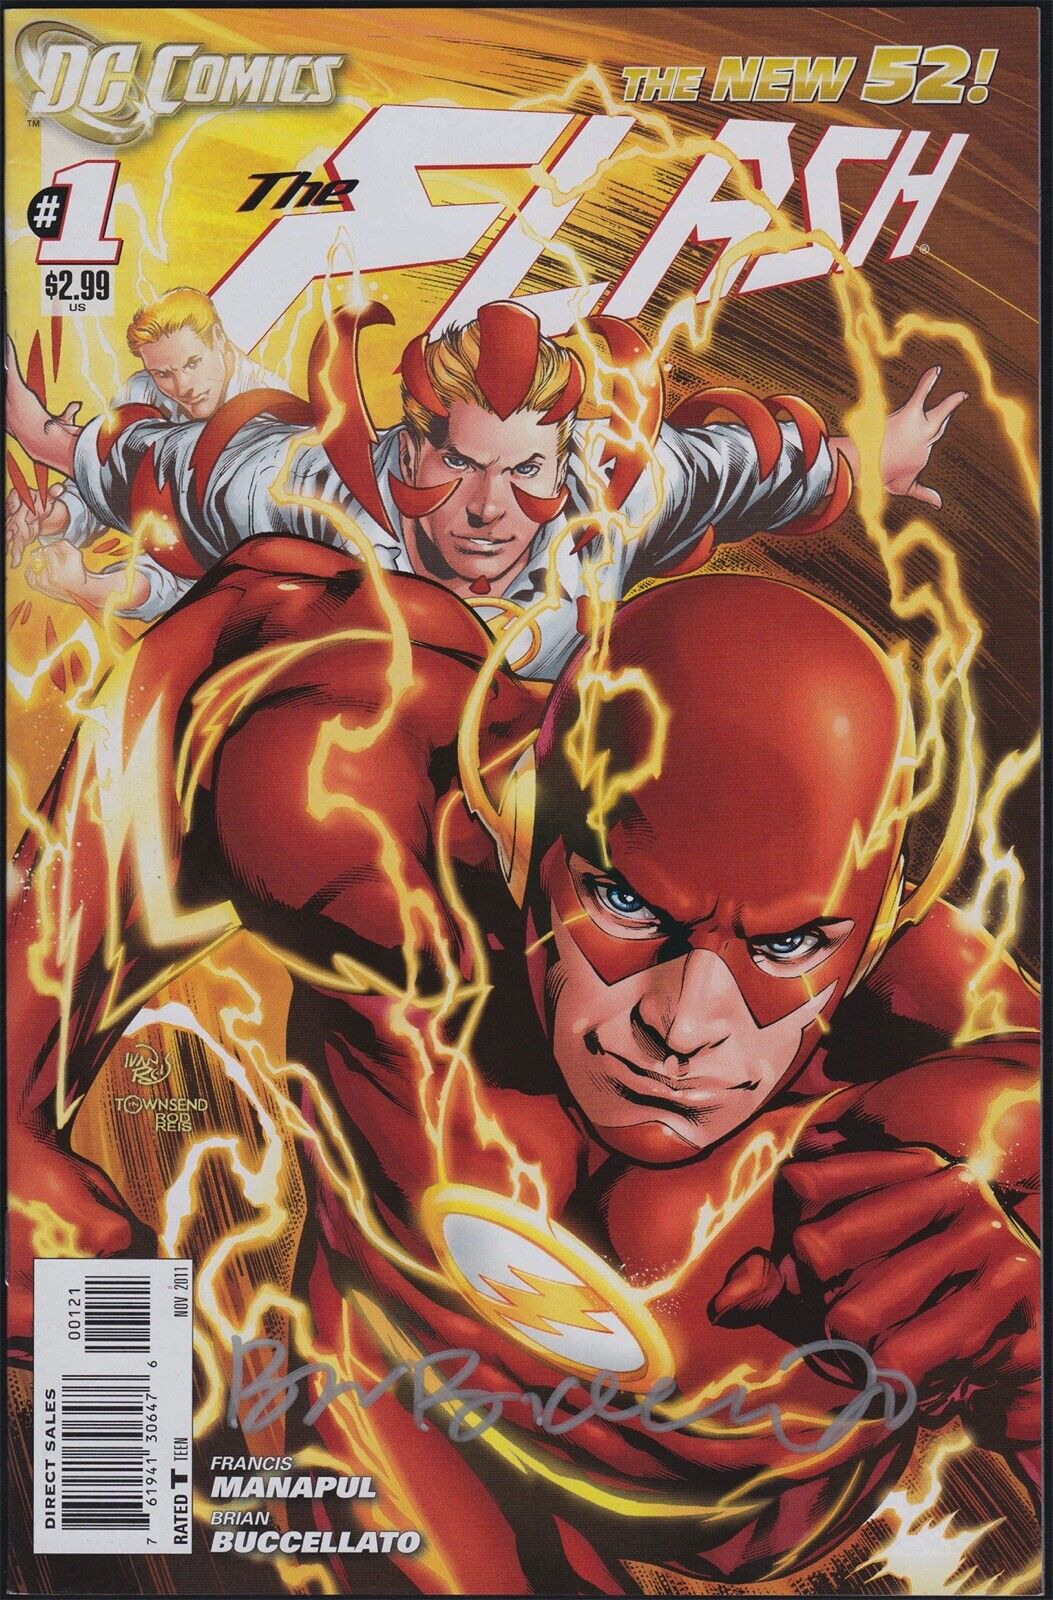 DC Comics THE FLASH #1 New 52 Variant Cover Signed by Brian Buccalleto NM